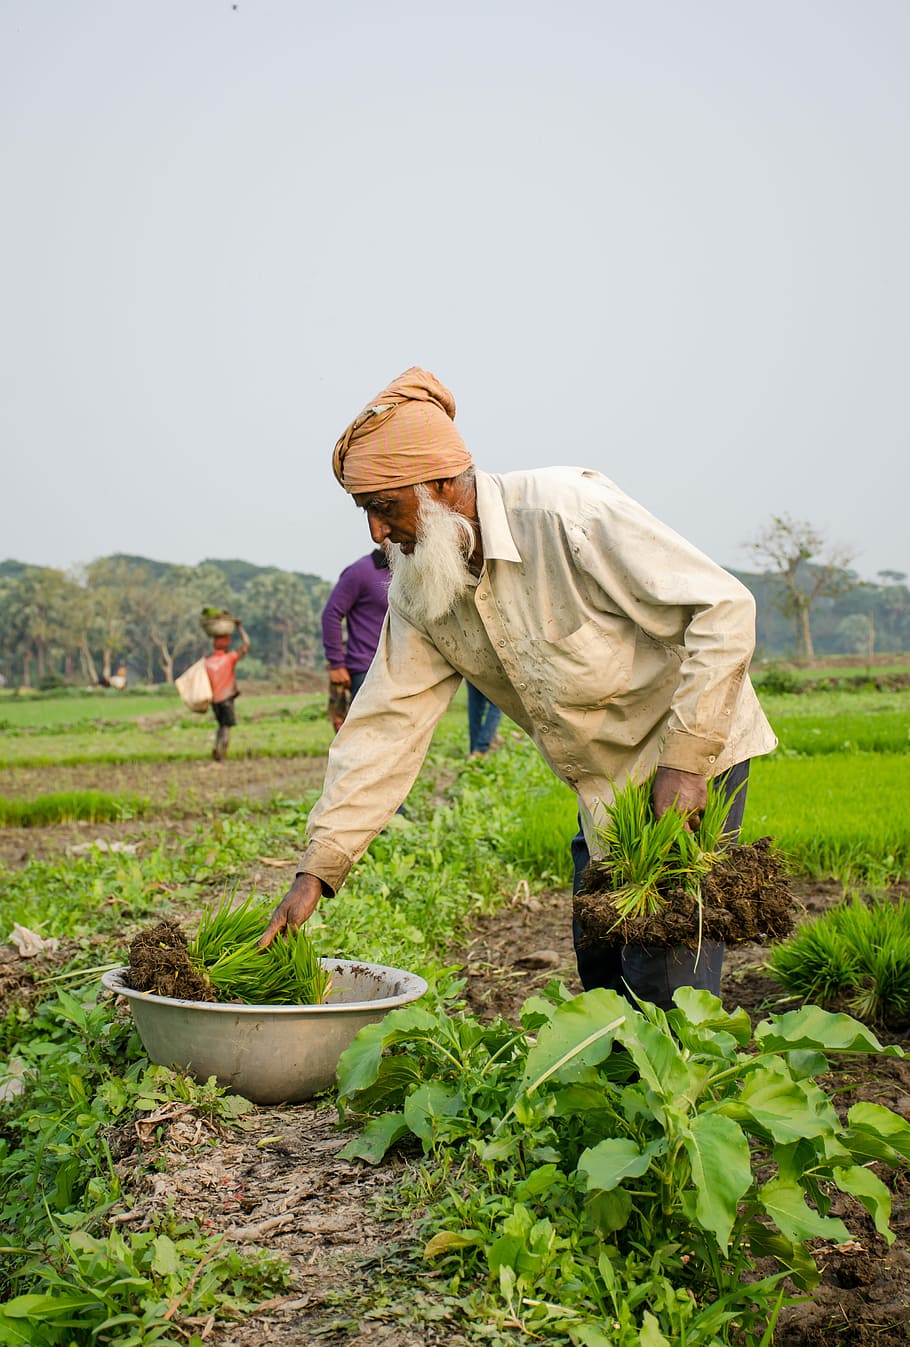 working, people, farming, oldman, old, grandfather, filled, work, growth, agriculture